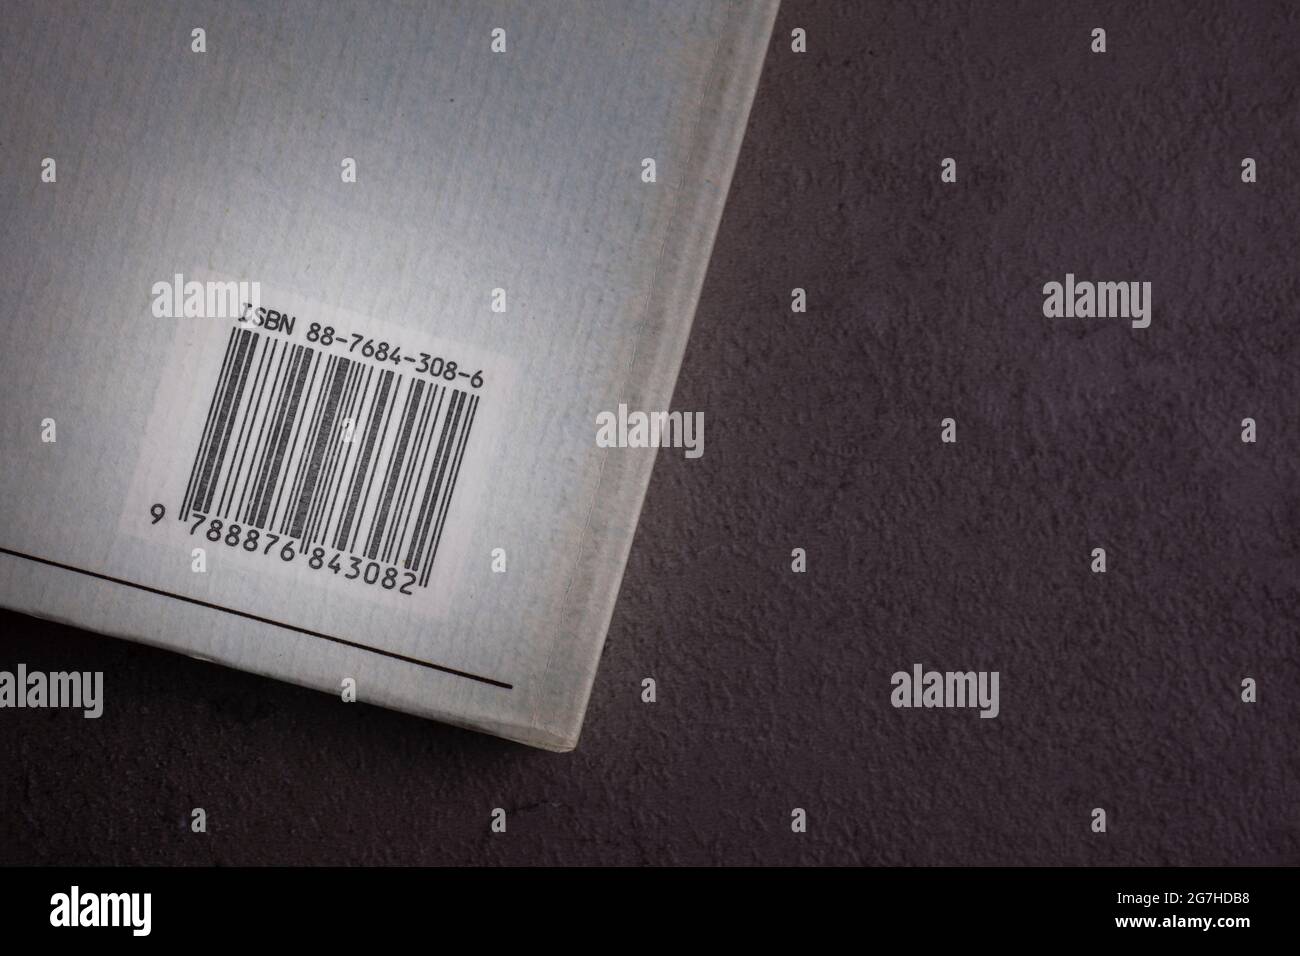 ISBN code on book cover Stock Photo